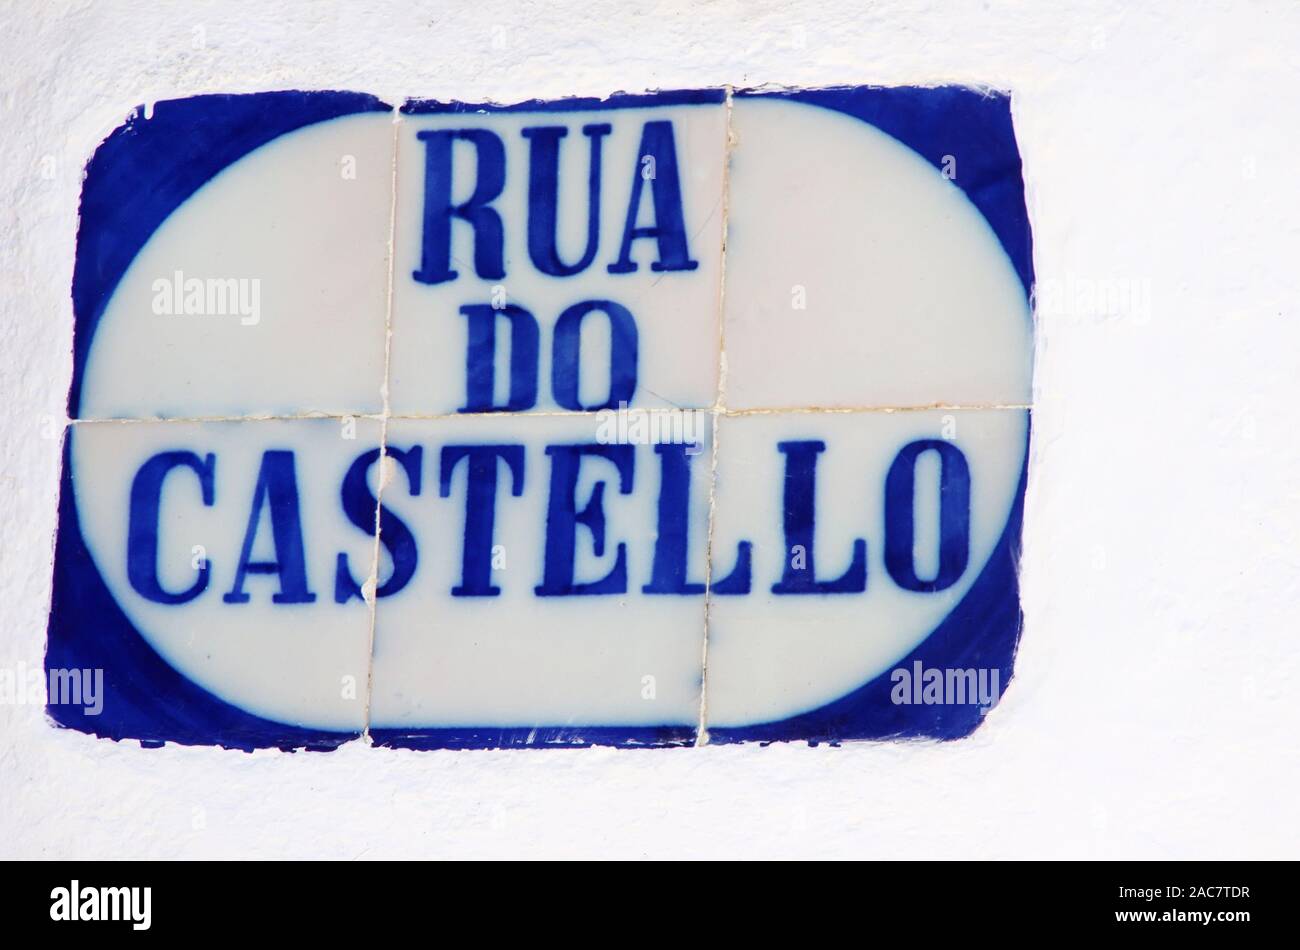 tile plaque at south of Portugal: ' Rua do castello' 'Street of castle' Stock Photo